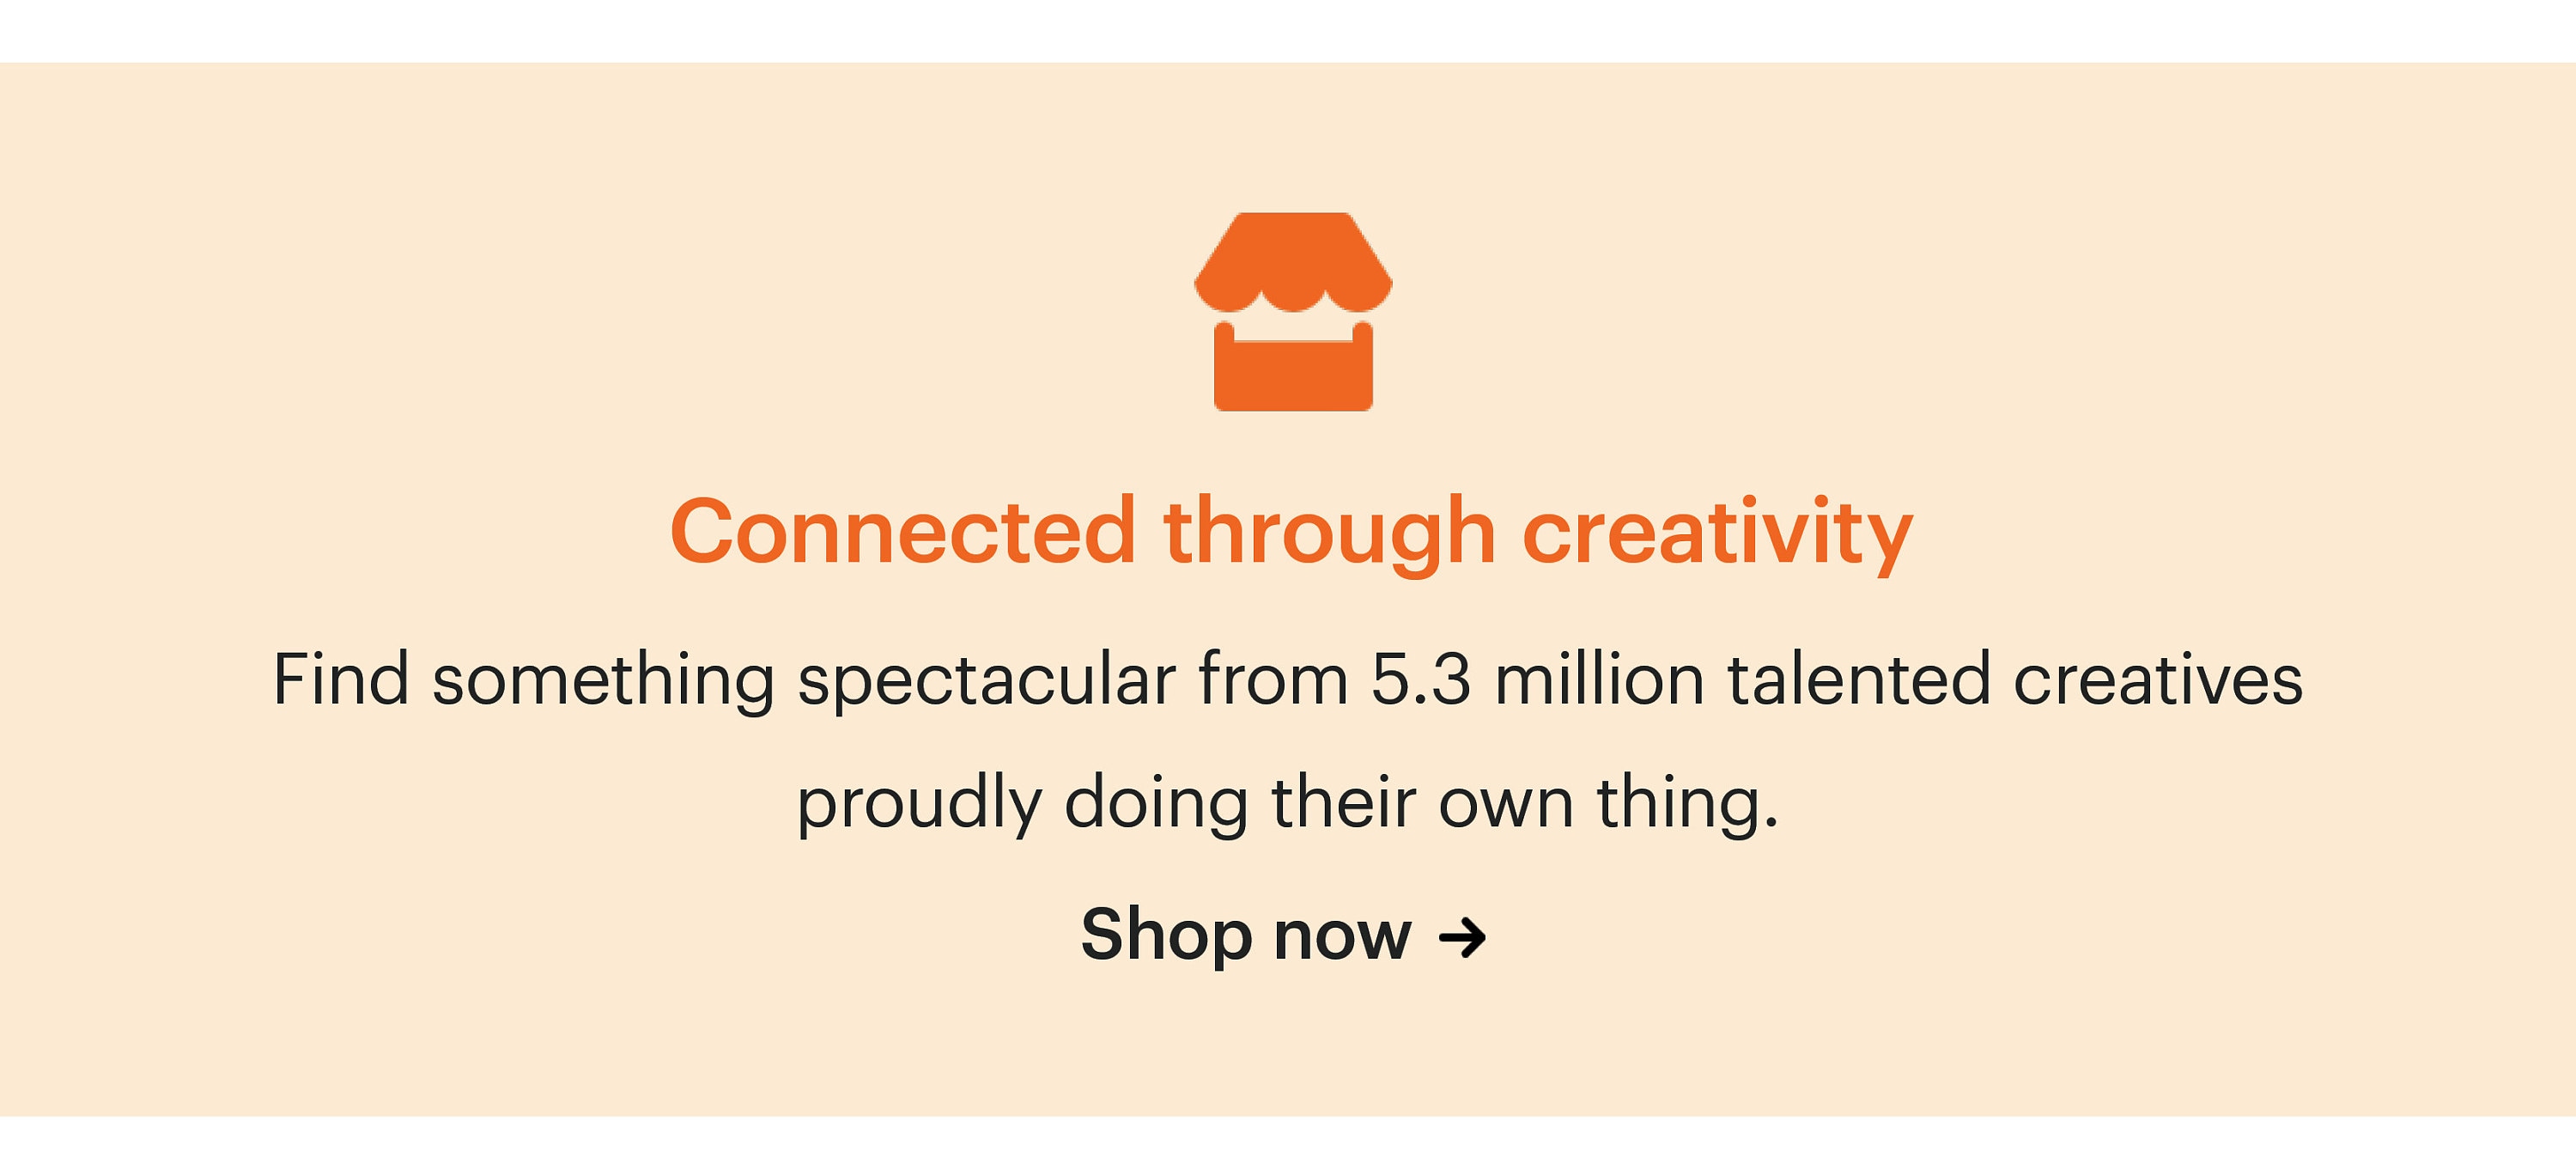 A banner encouraging shoppers to support small businesses on Etsy.